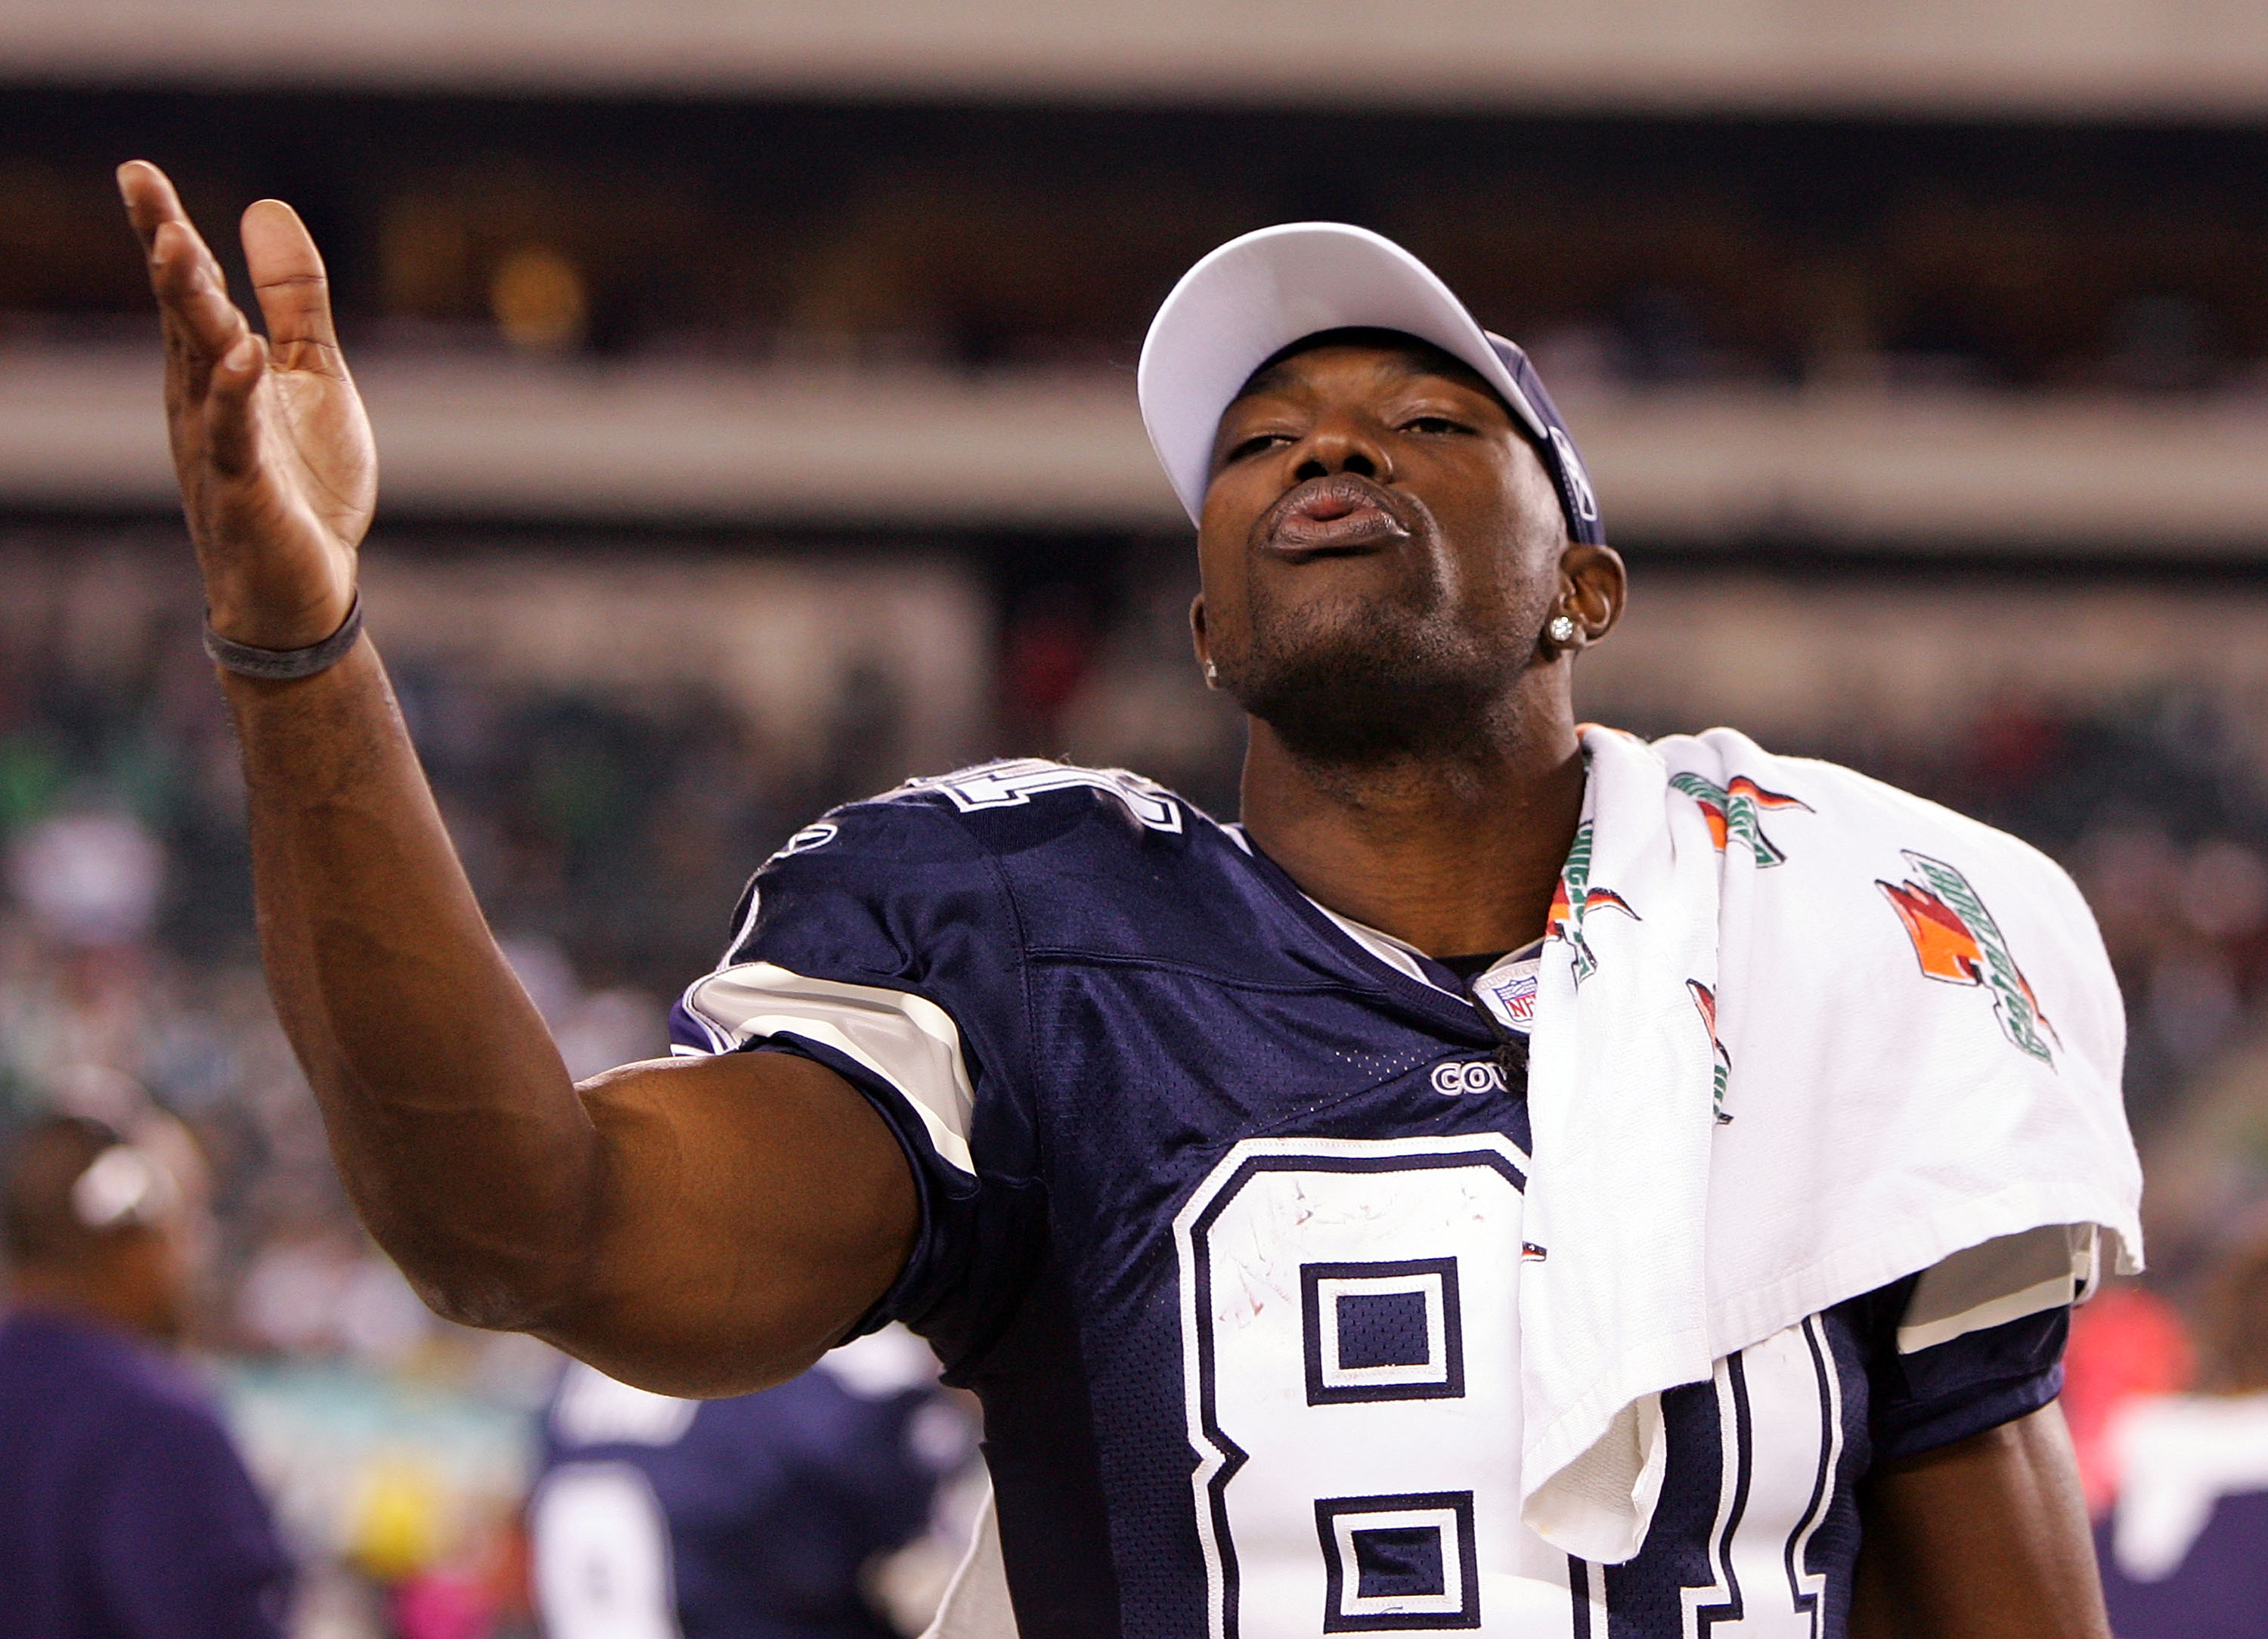 PHILADELPHIA - NOVEMBER 04:  Terrell Owens #81 of the Dallas Cowboys blows a kiss to heckling fans of the Philadelphia Eagles late in their game on November 4, 2007 at Lincoln Financial Field in Philadelphia, Pennsylvania.  (Photo by Jim McIsaac/Getty Ima